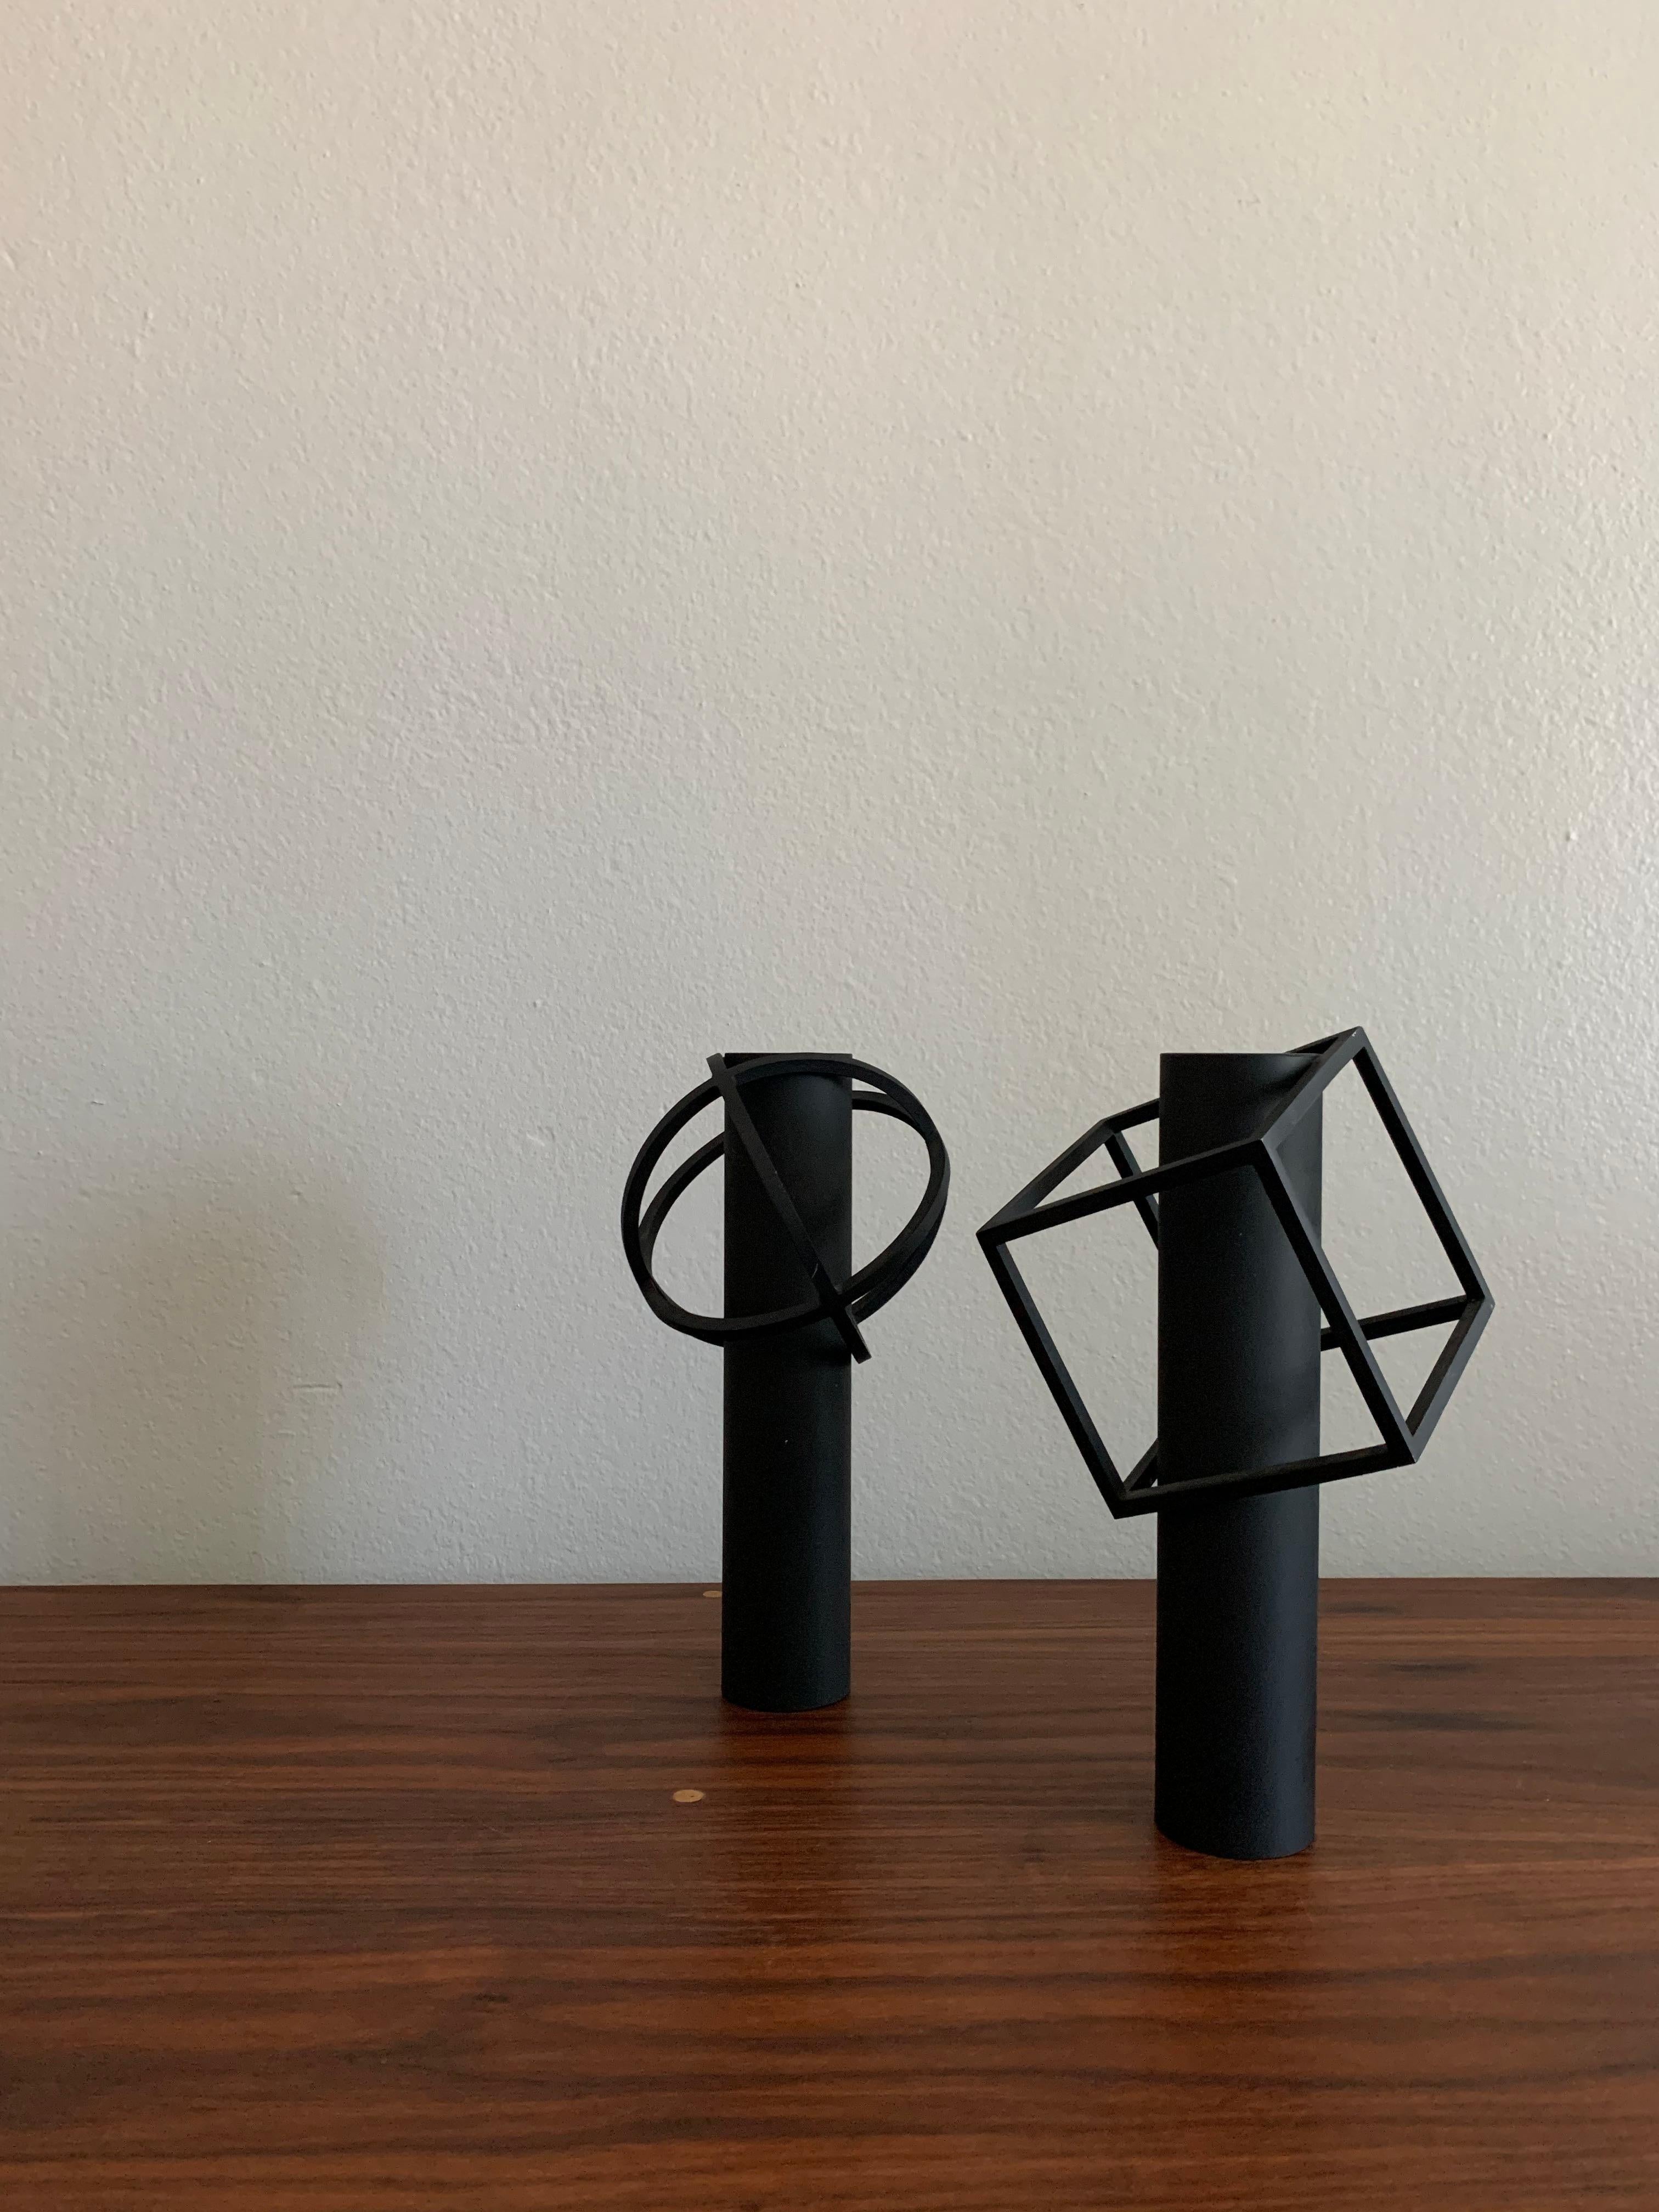 Y·M·D vases in die cast iron by Takenobu Igarashi for Takenaka Works Co., Ltd. circa 1992. 

“I wanted to create a flower vase that suggests a flower even in its absence.” - Igarashi. 

Dimensions: 
Sphere W 130 x H 241 x D 130 mm
Cube W 140 x